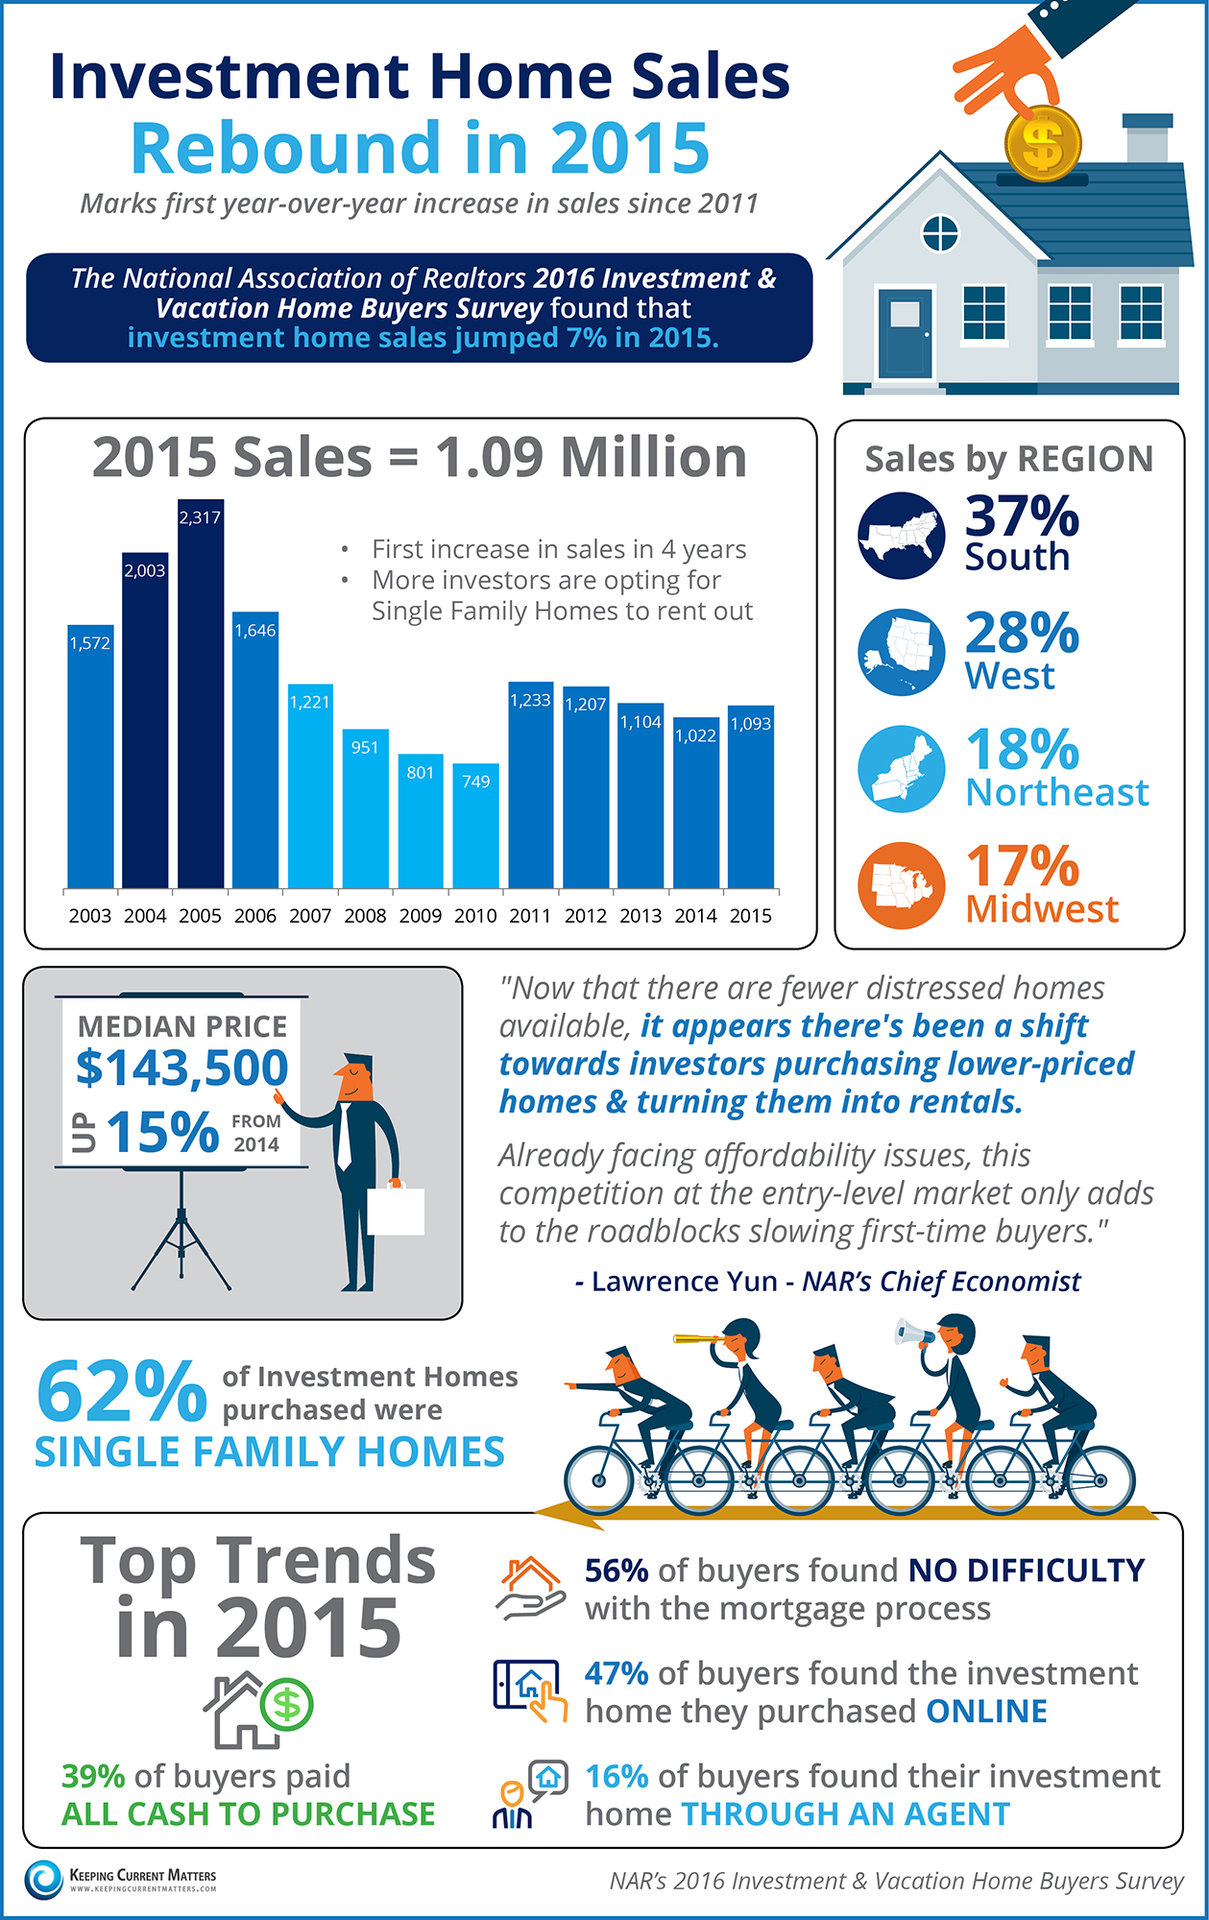 Investment Home Sales Rebound in 2015 | Keeping Current Matters